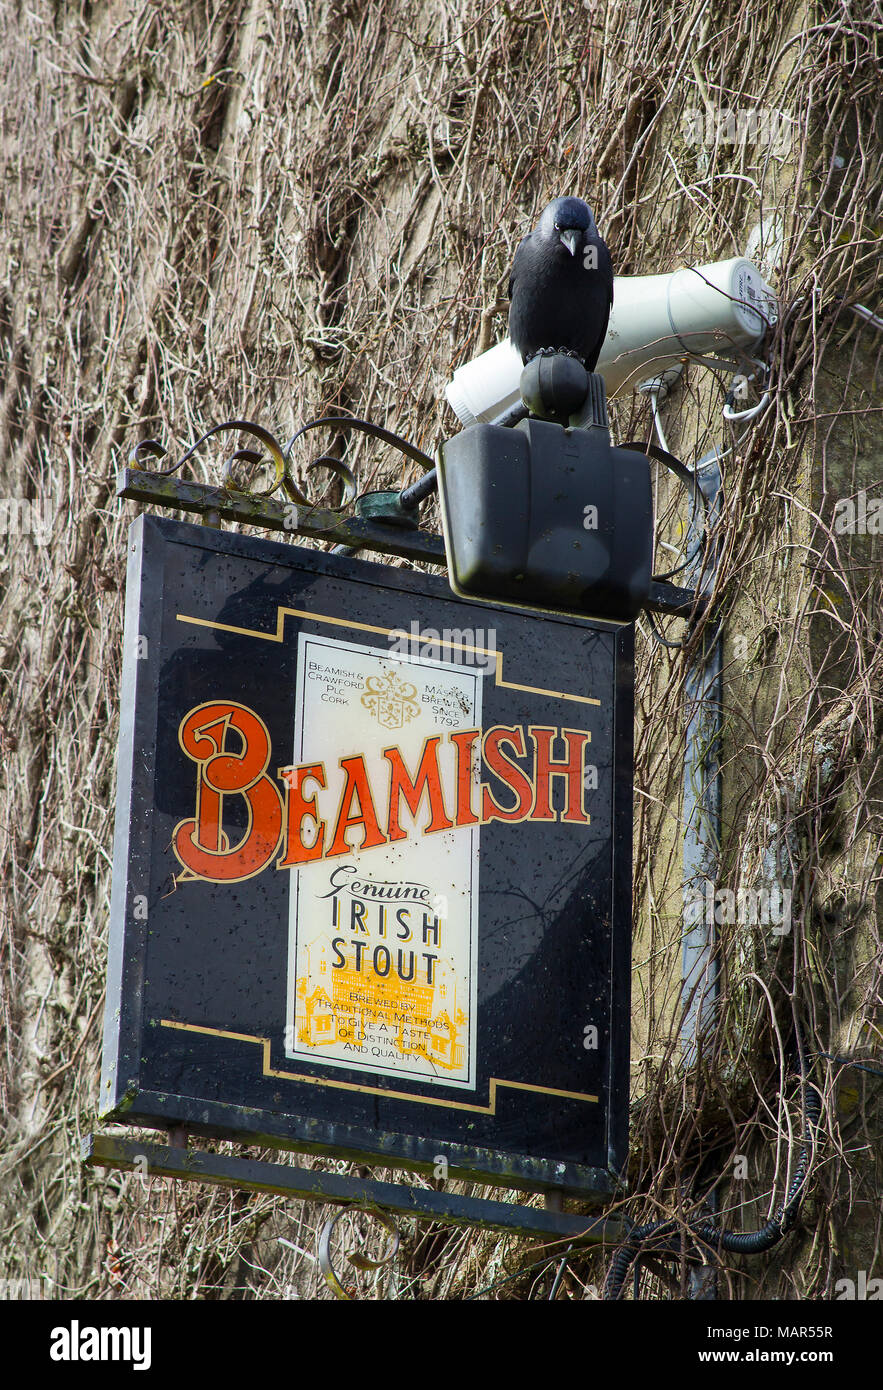 A black hooded crow perched on top of s sign advertising Beamish black stout in Blarney village County Cork Ireland Stock Photo